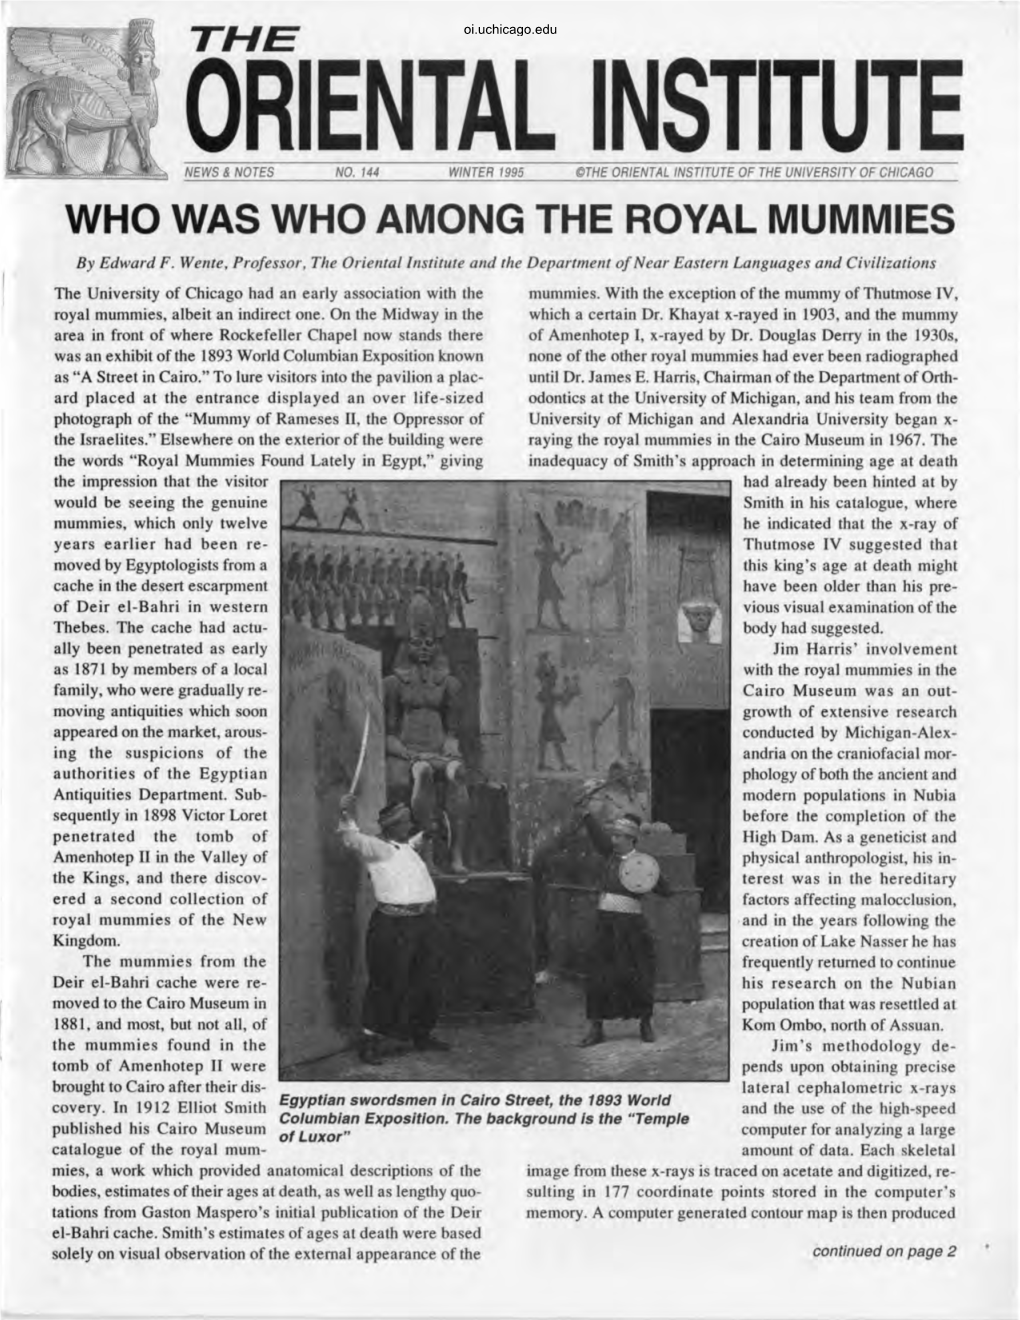 WHO WAS WHO AMONG the ROYAL MUMMIES by Edward F